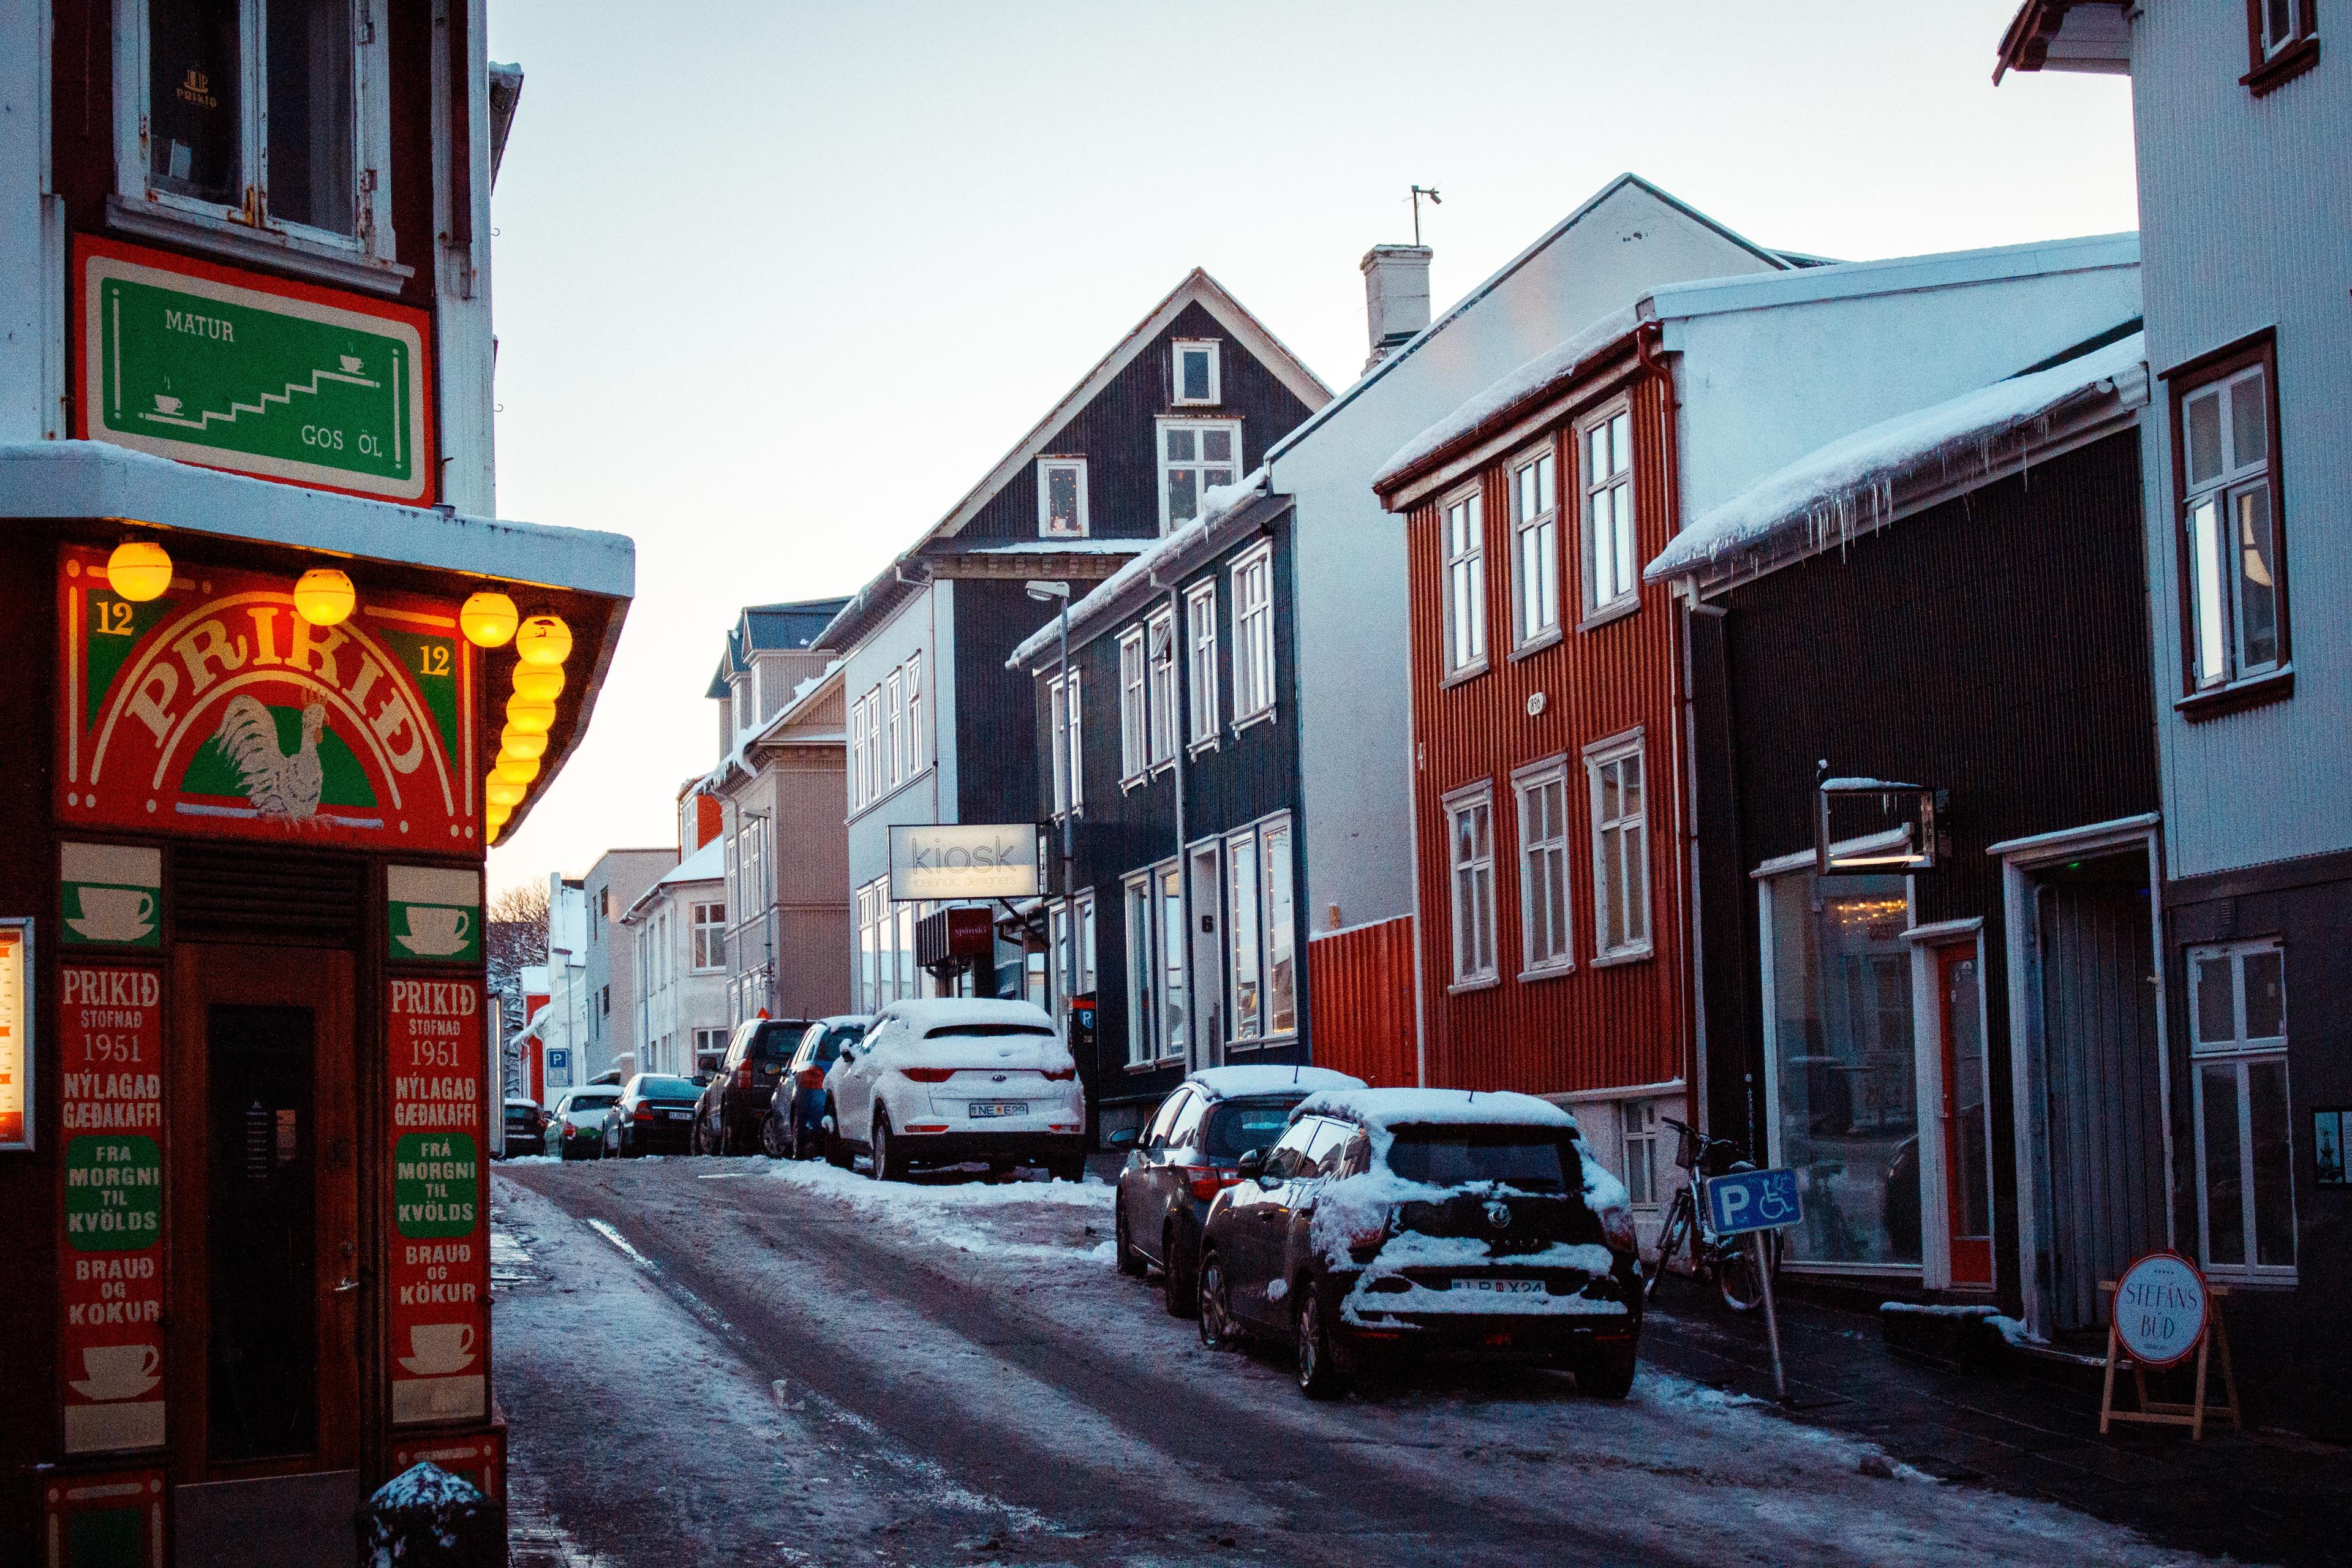 A snowy street scene in an Icelandic town during twilight with colourful houses